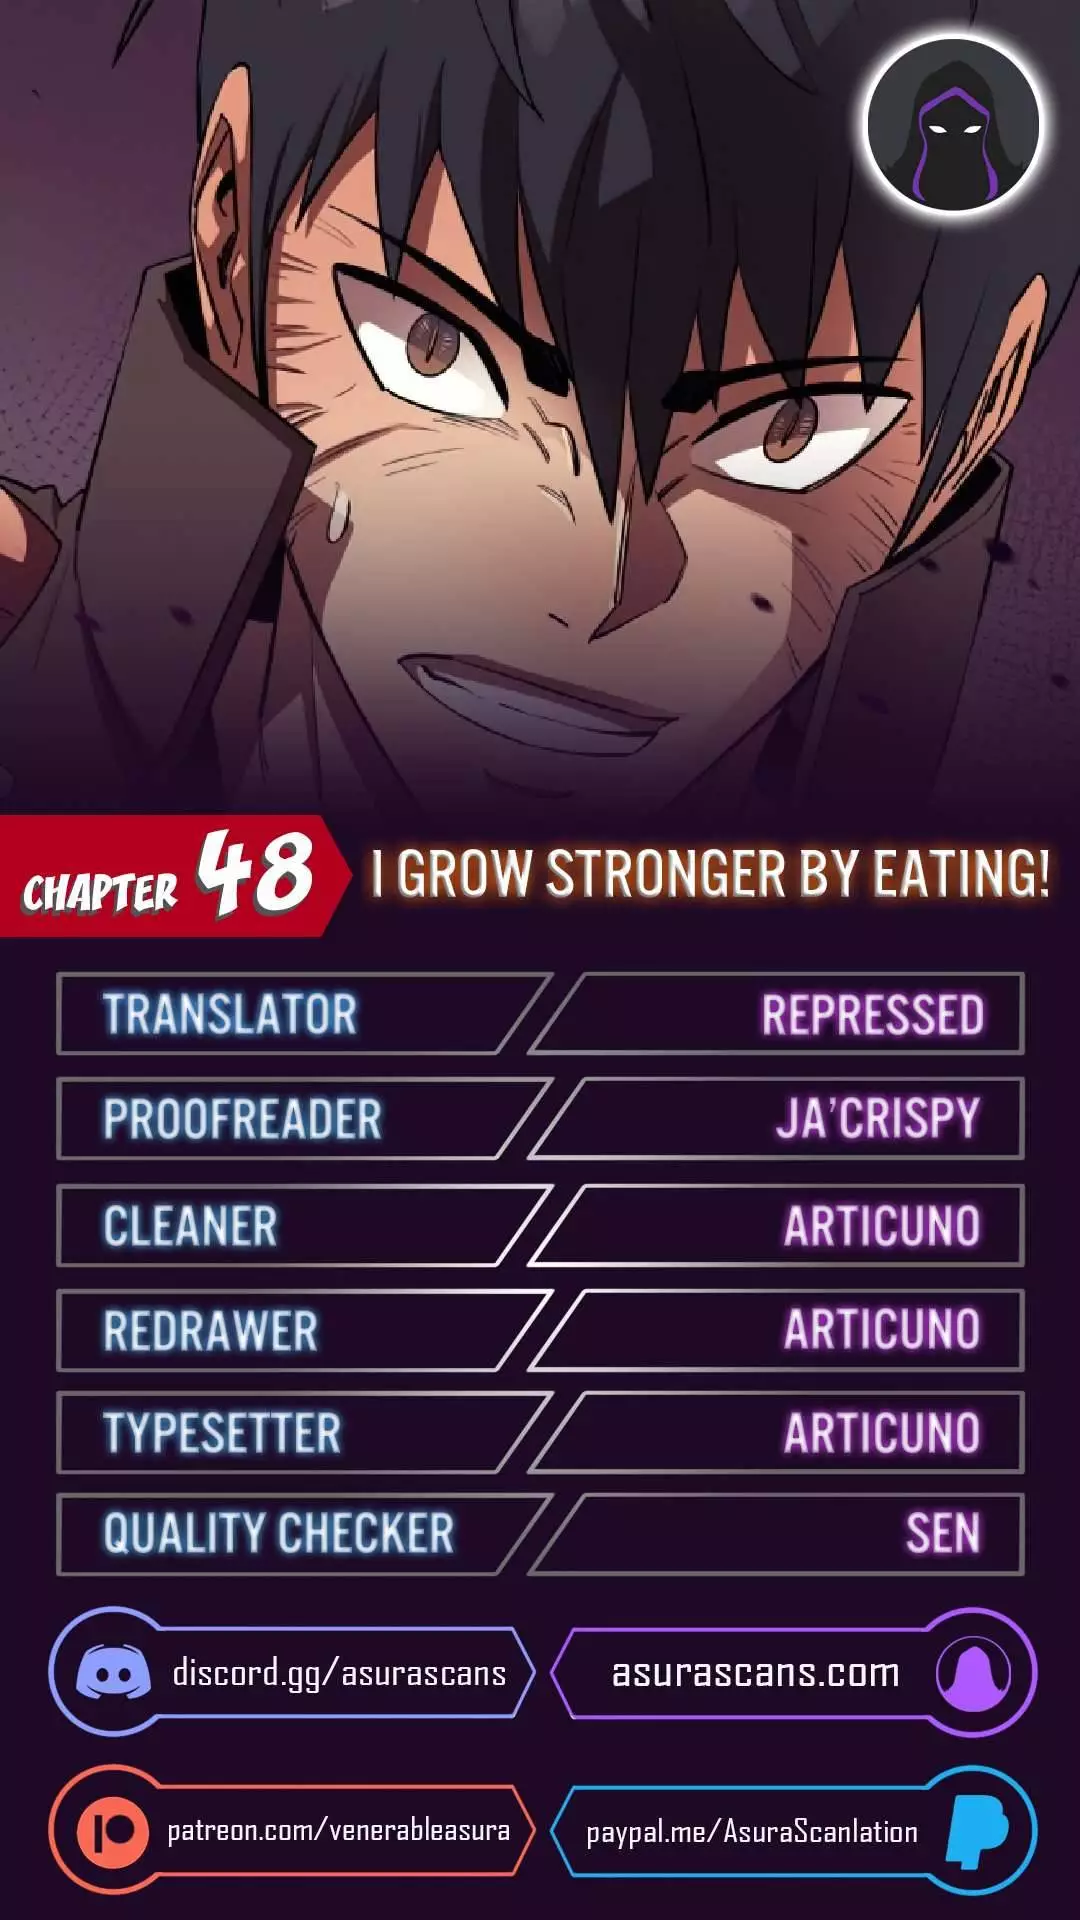 I Grow Stronger By Eating! - 48 page 1-a8af253f